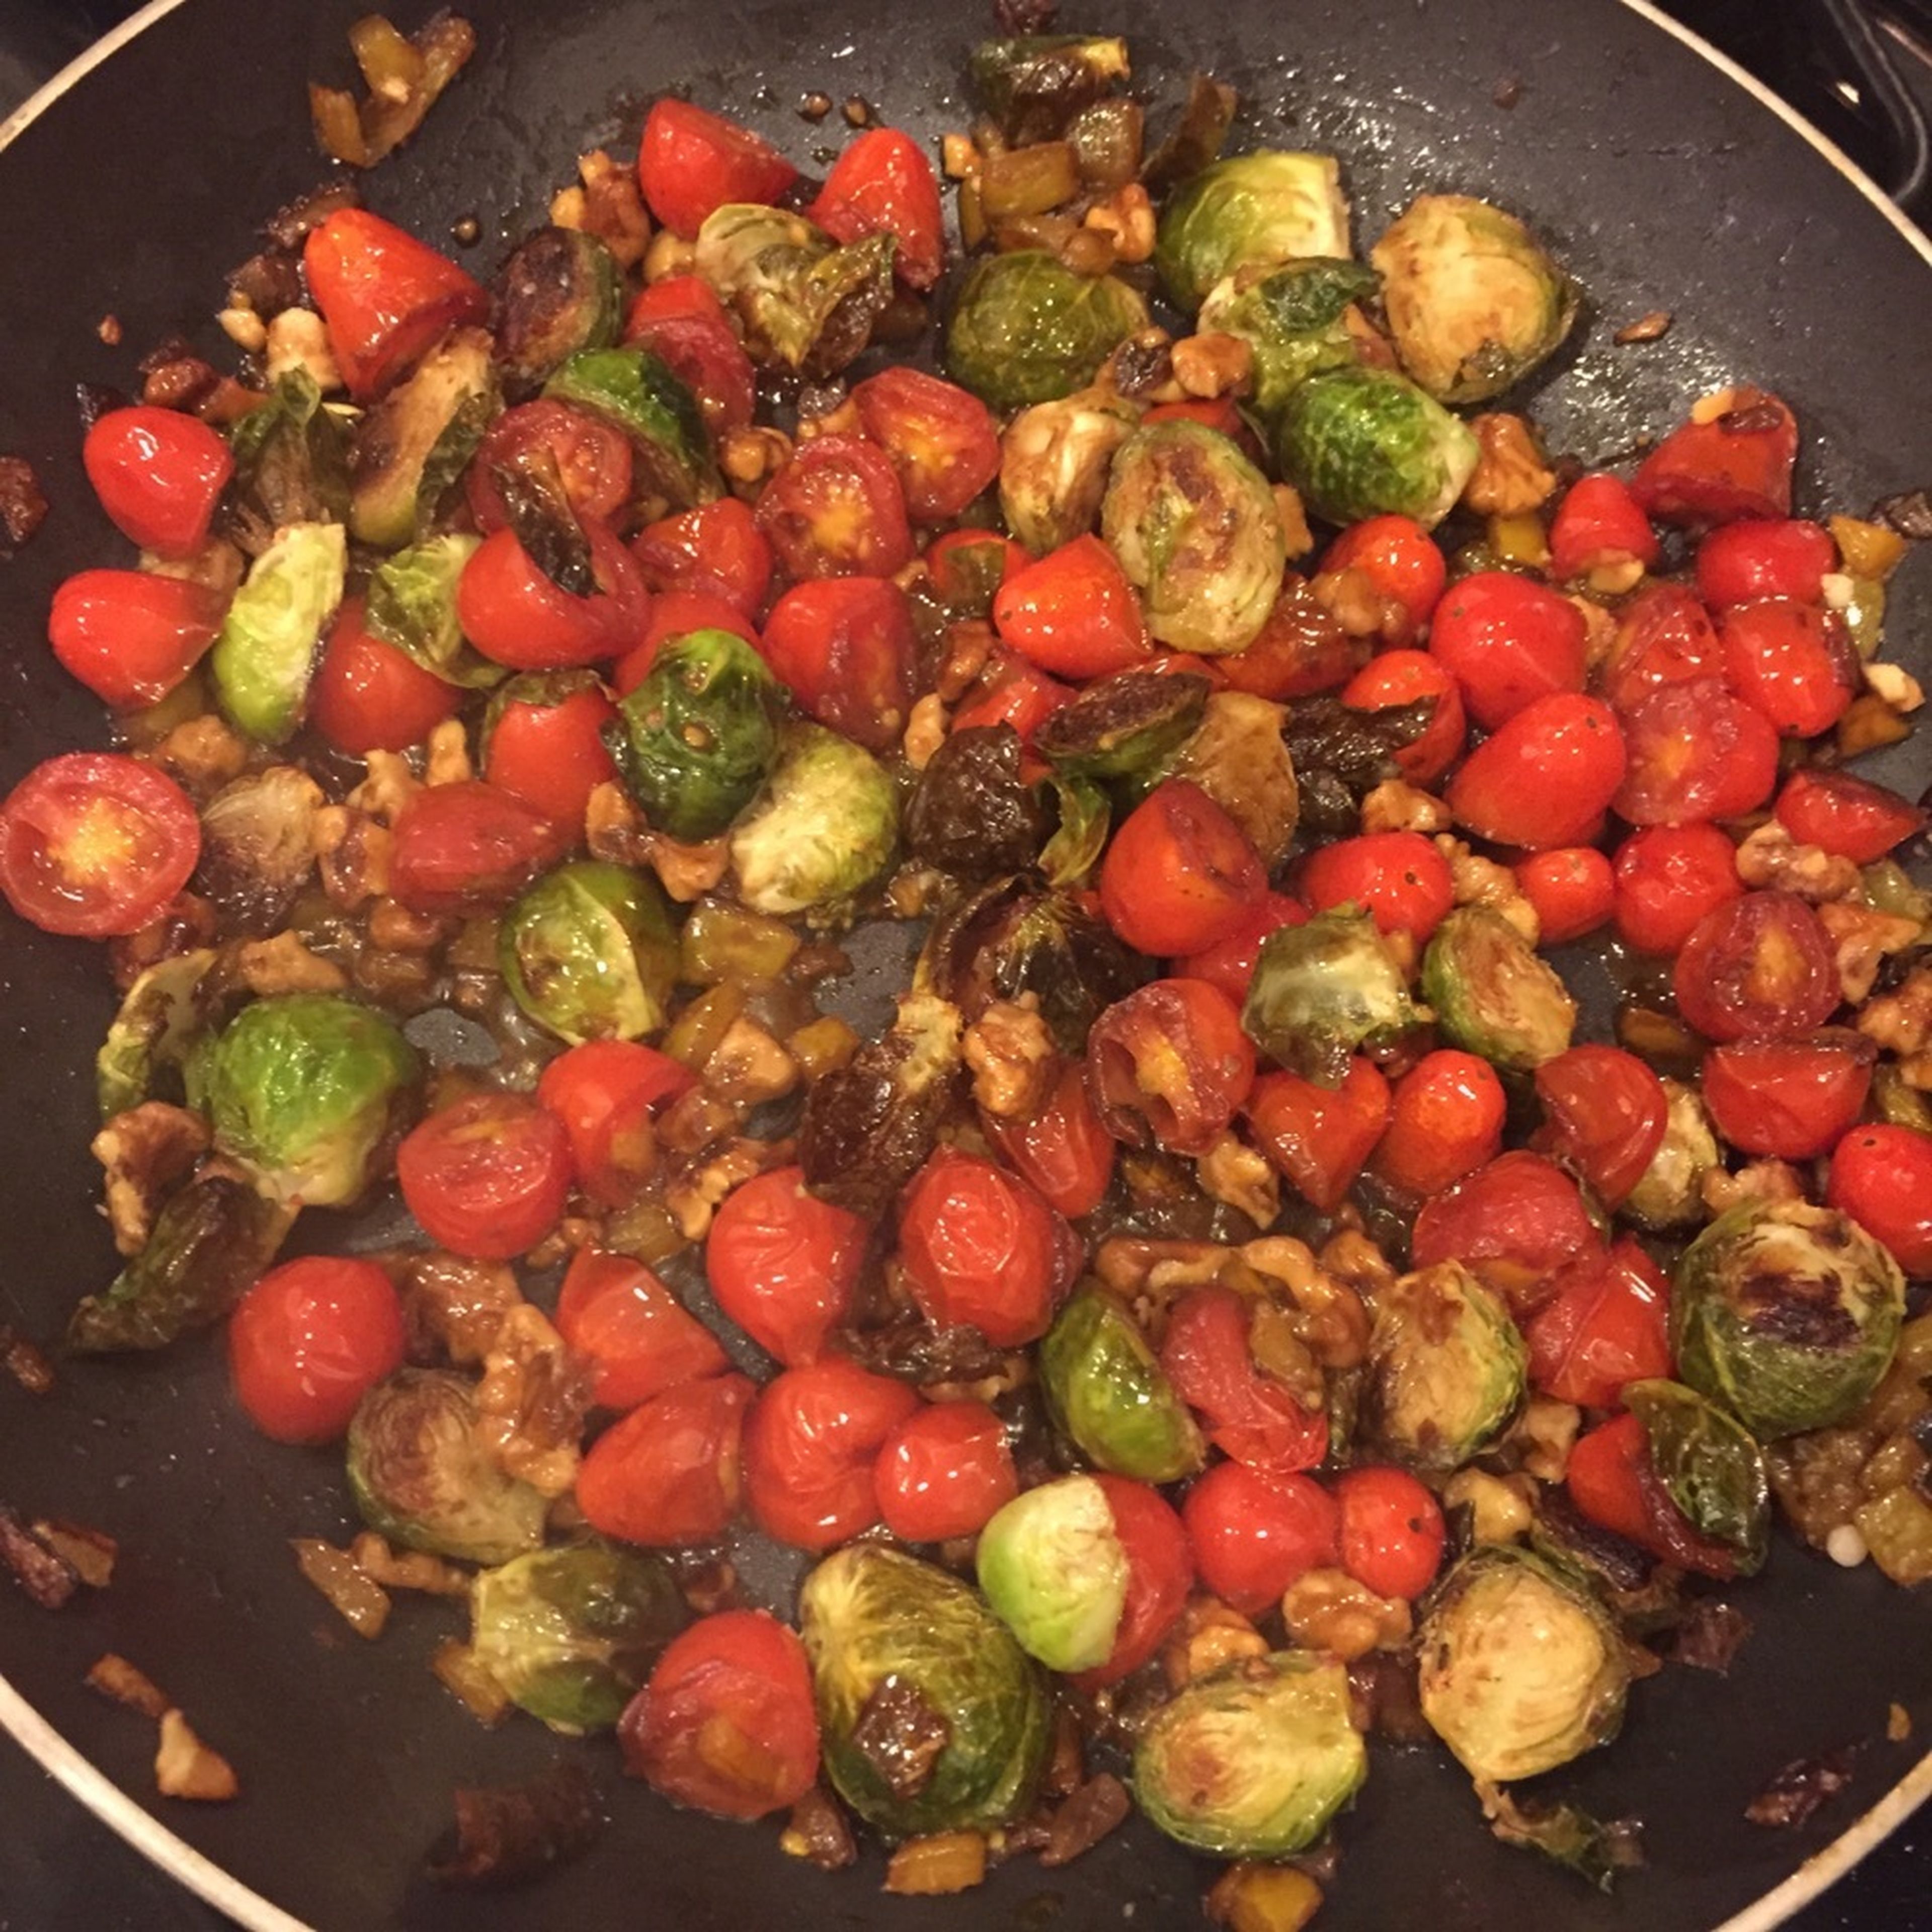 Add roasted walnuts and Brussels sprouts and continue to toss until balsamic vinegar has become slightly caramelized.